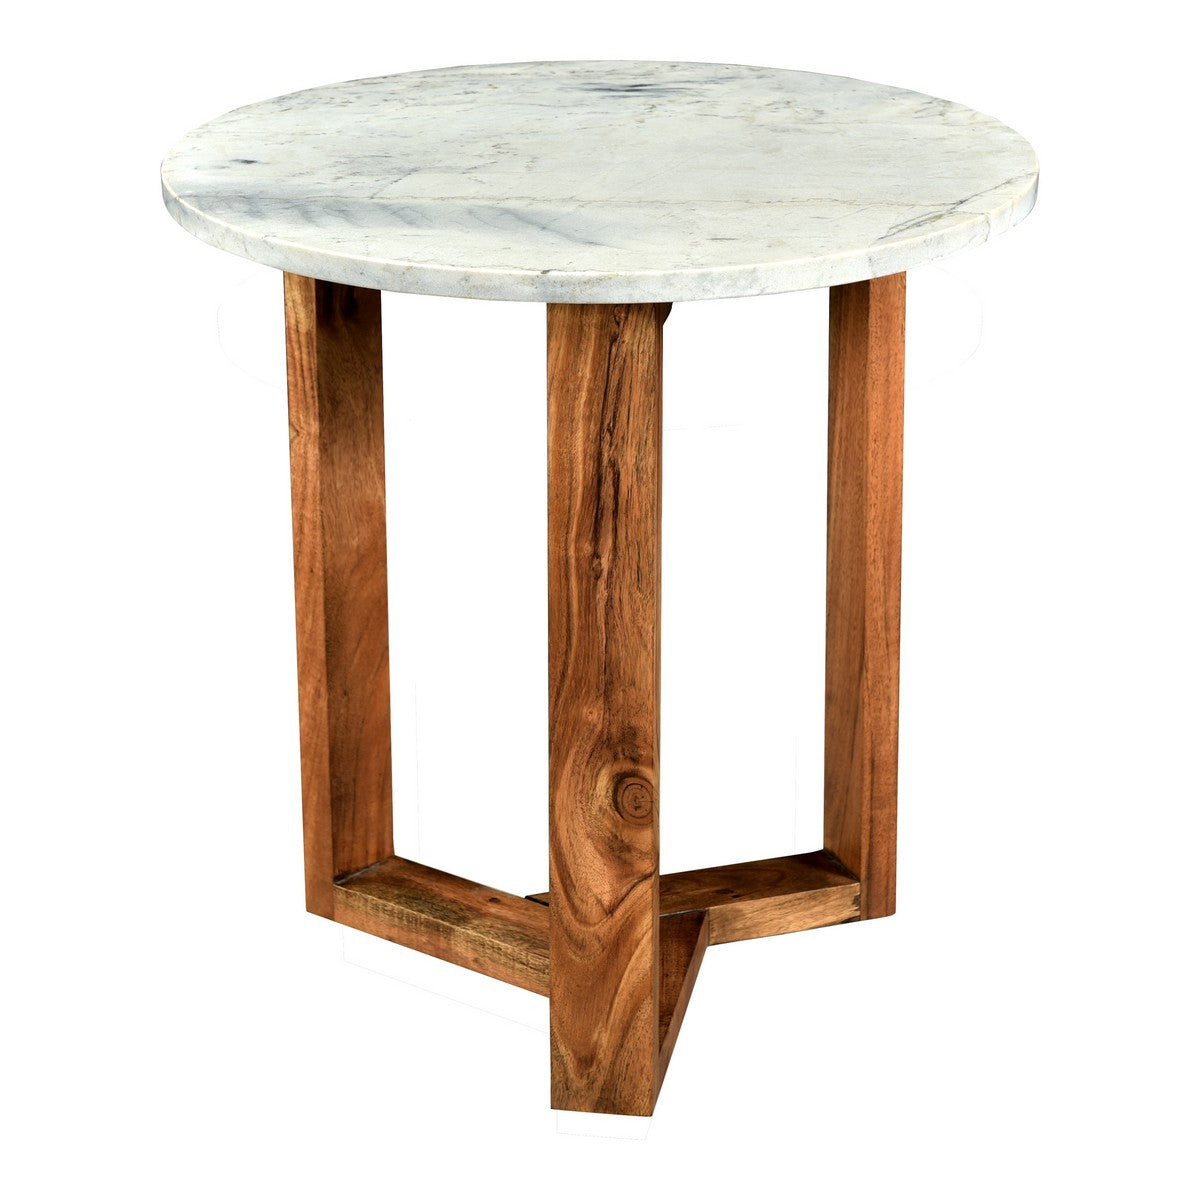 Moe's Home Collection Jinxx Side Table Brown - JD-1019-18